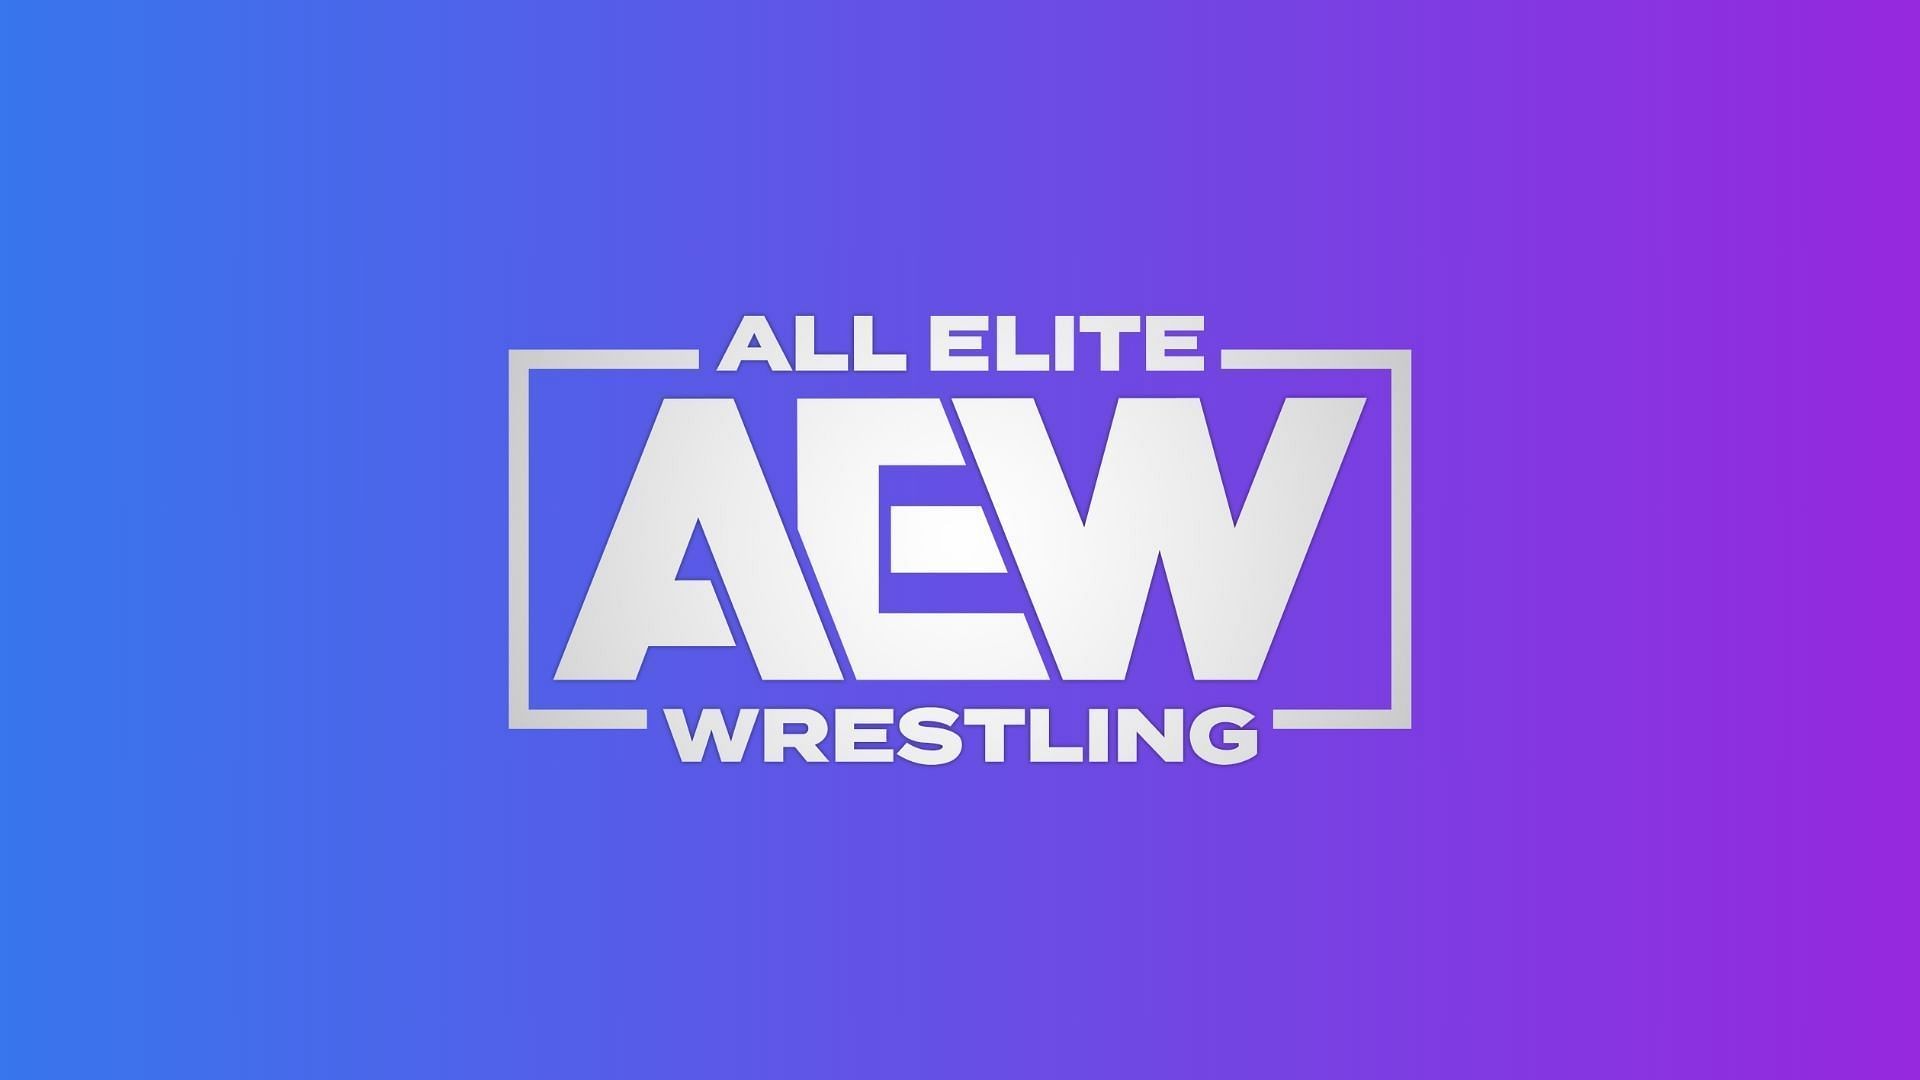 Major changes imminent in AEW programming as per reports